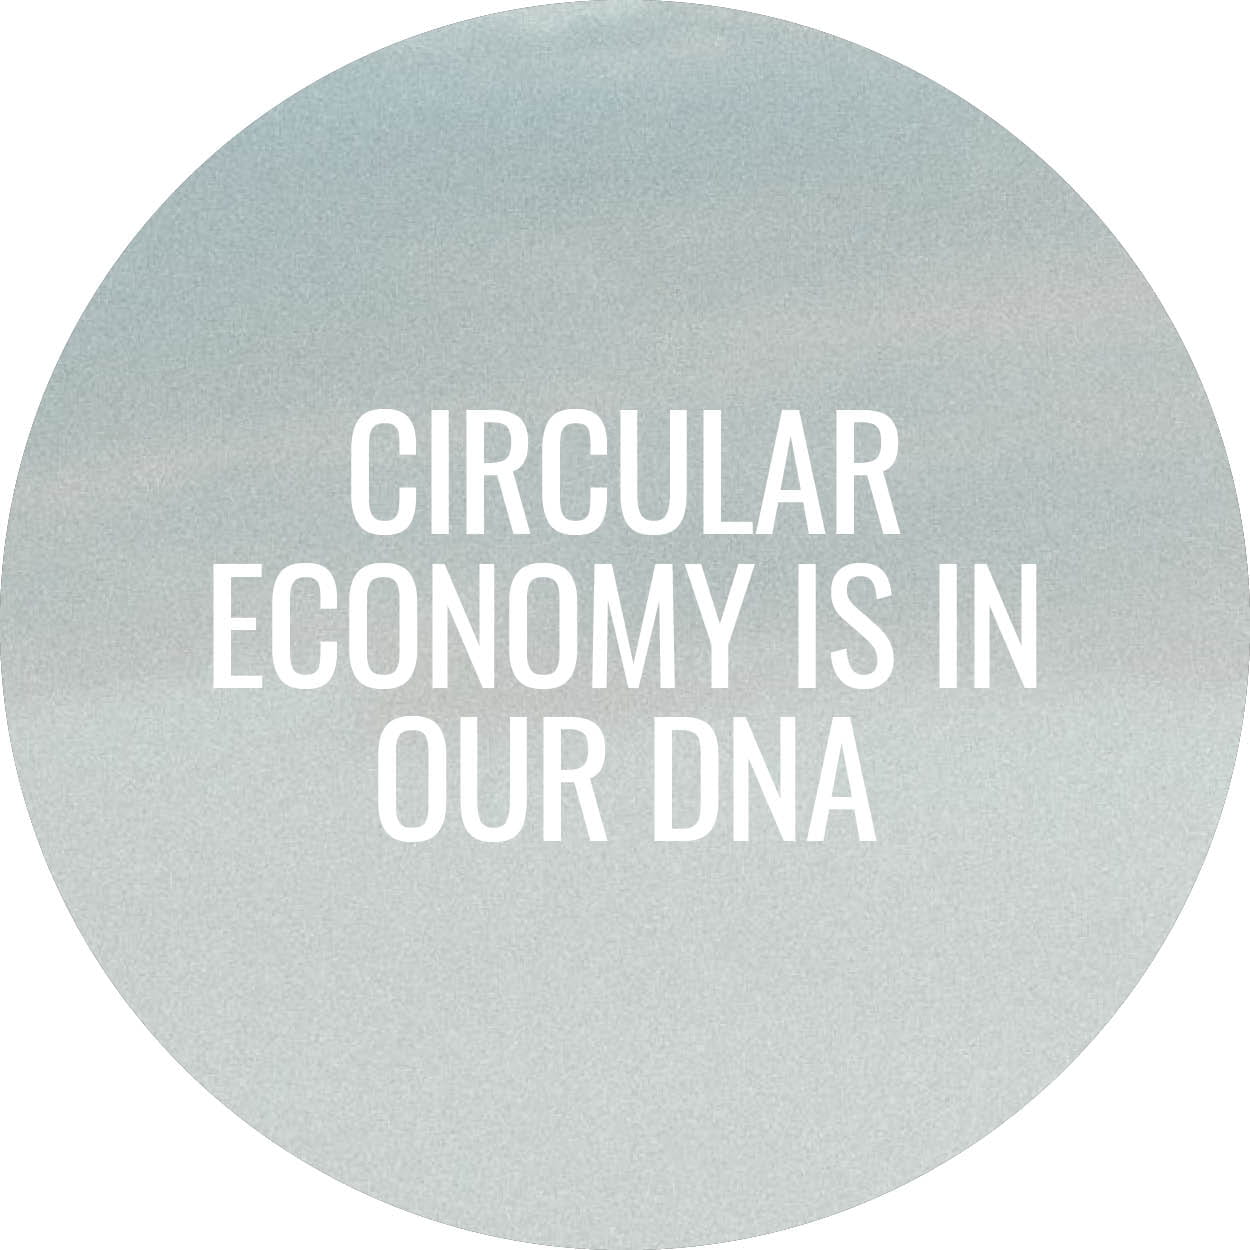 Circular economy is in our DNA